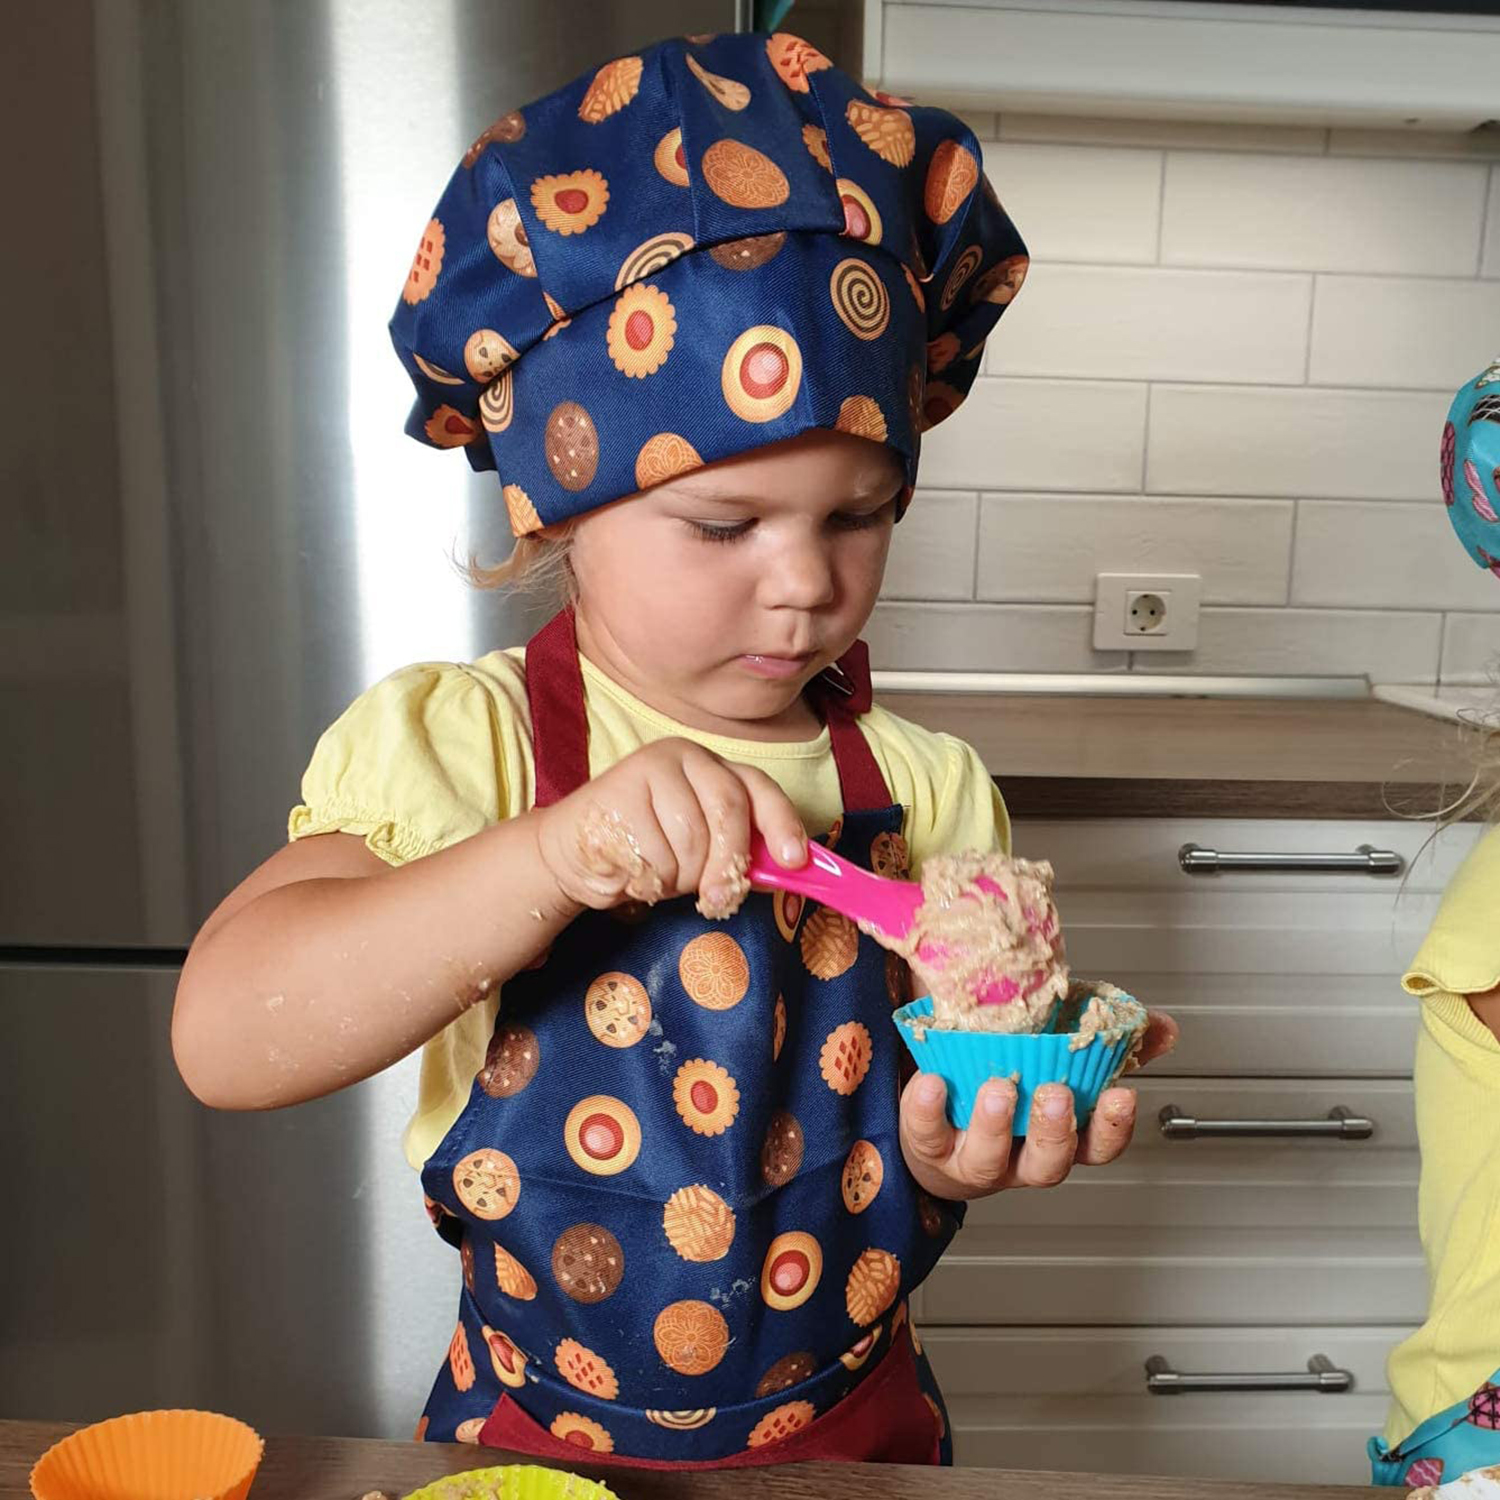 Spoon Cooking and Baking Game Play Set Includes Apron Chef Hat Anyren Chef Costume Set for Kids Rolling Pin Cookie Cutters & Baking Utensil Oven Mitt